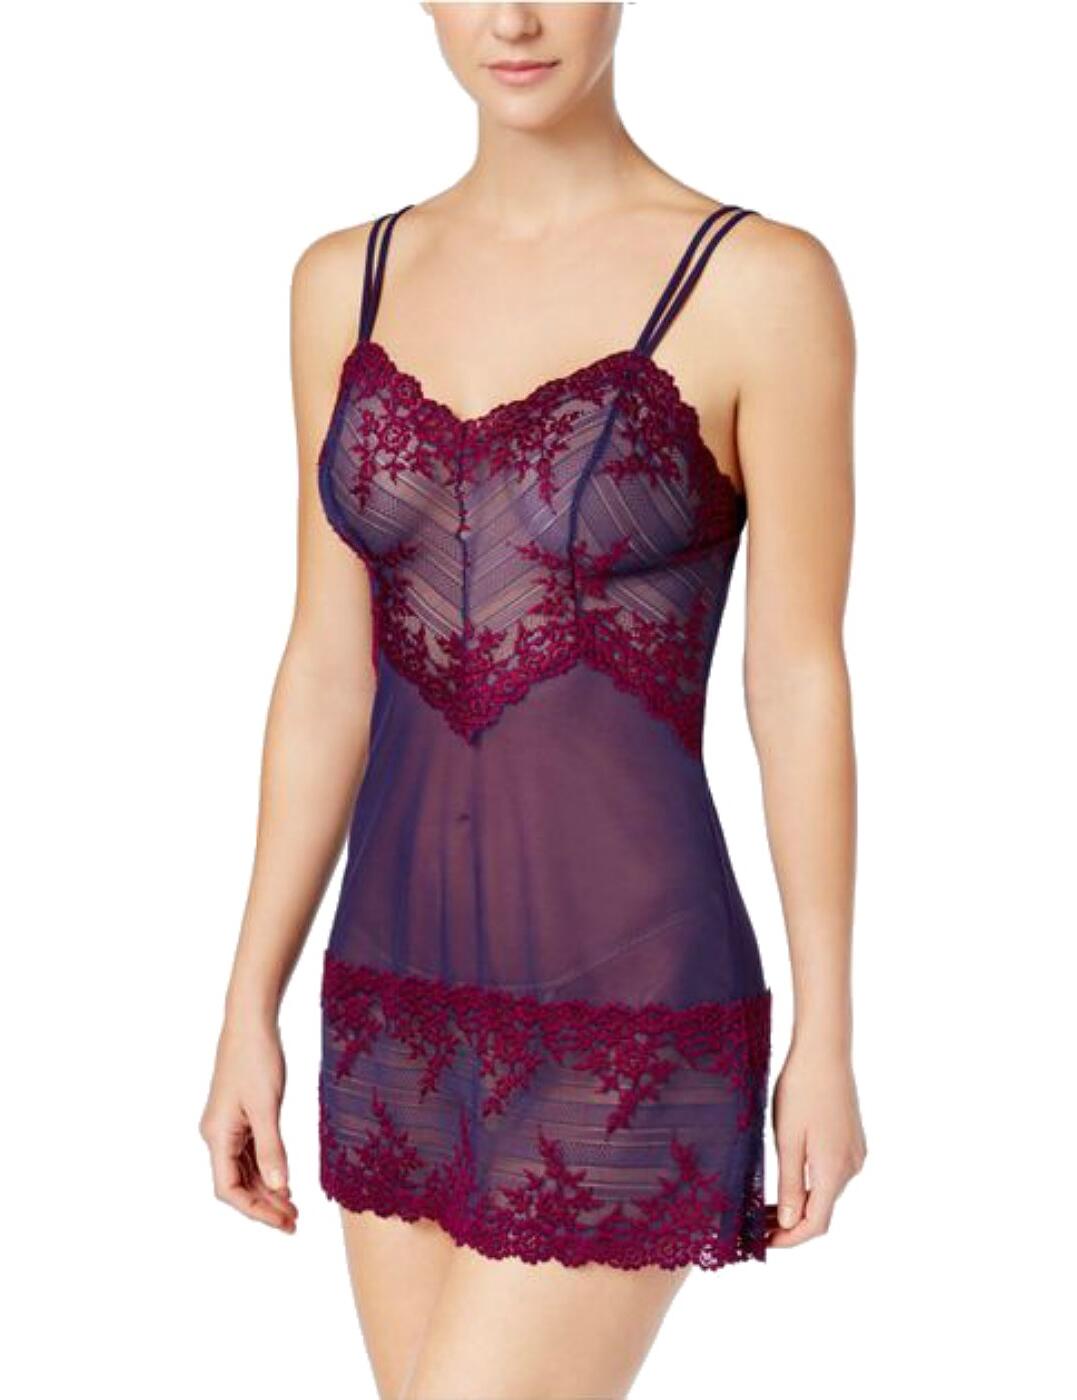 Wacoal ® Embrace Lace Sheer Chemise Lingerie Nightgown 814191 in